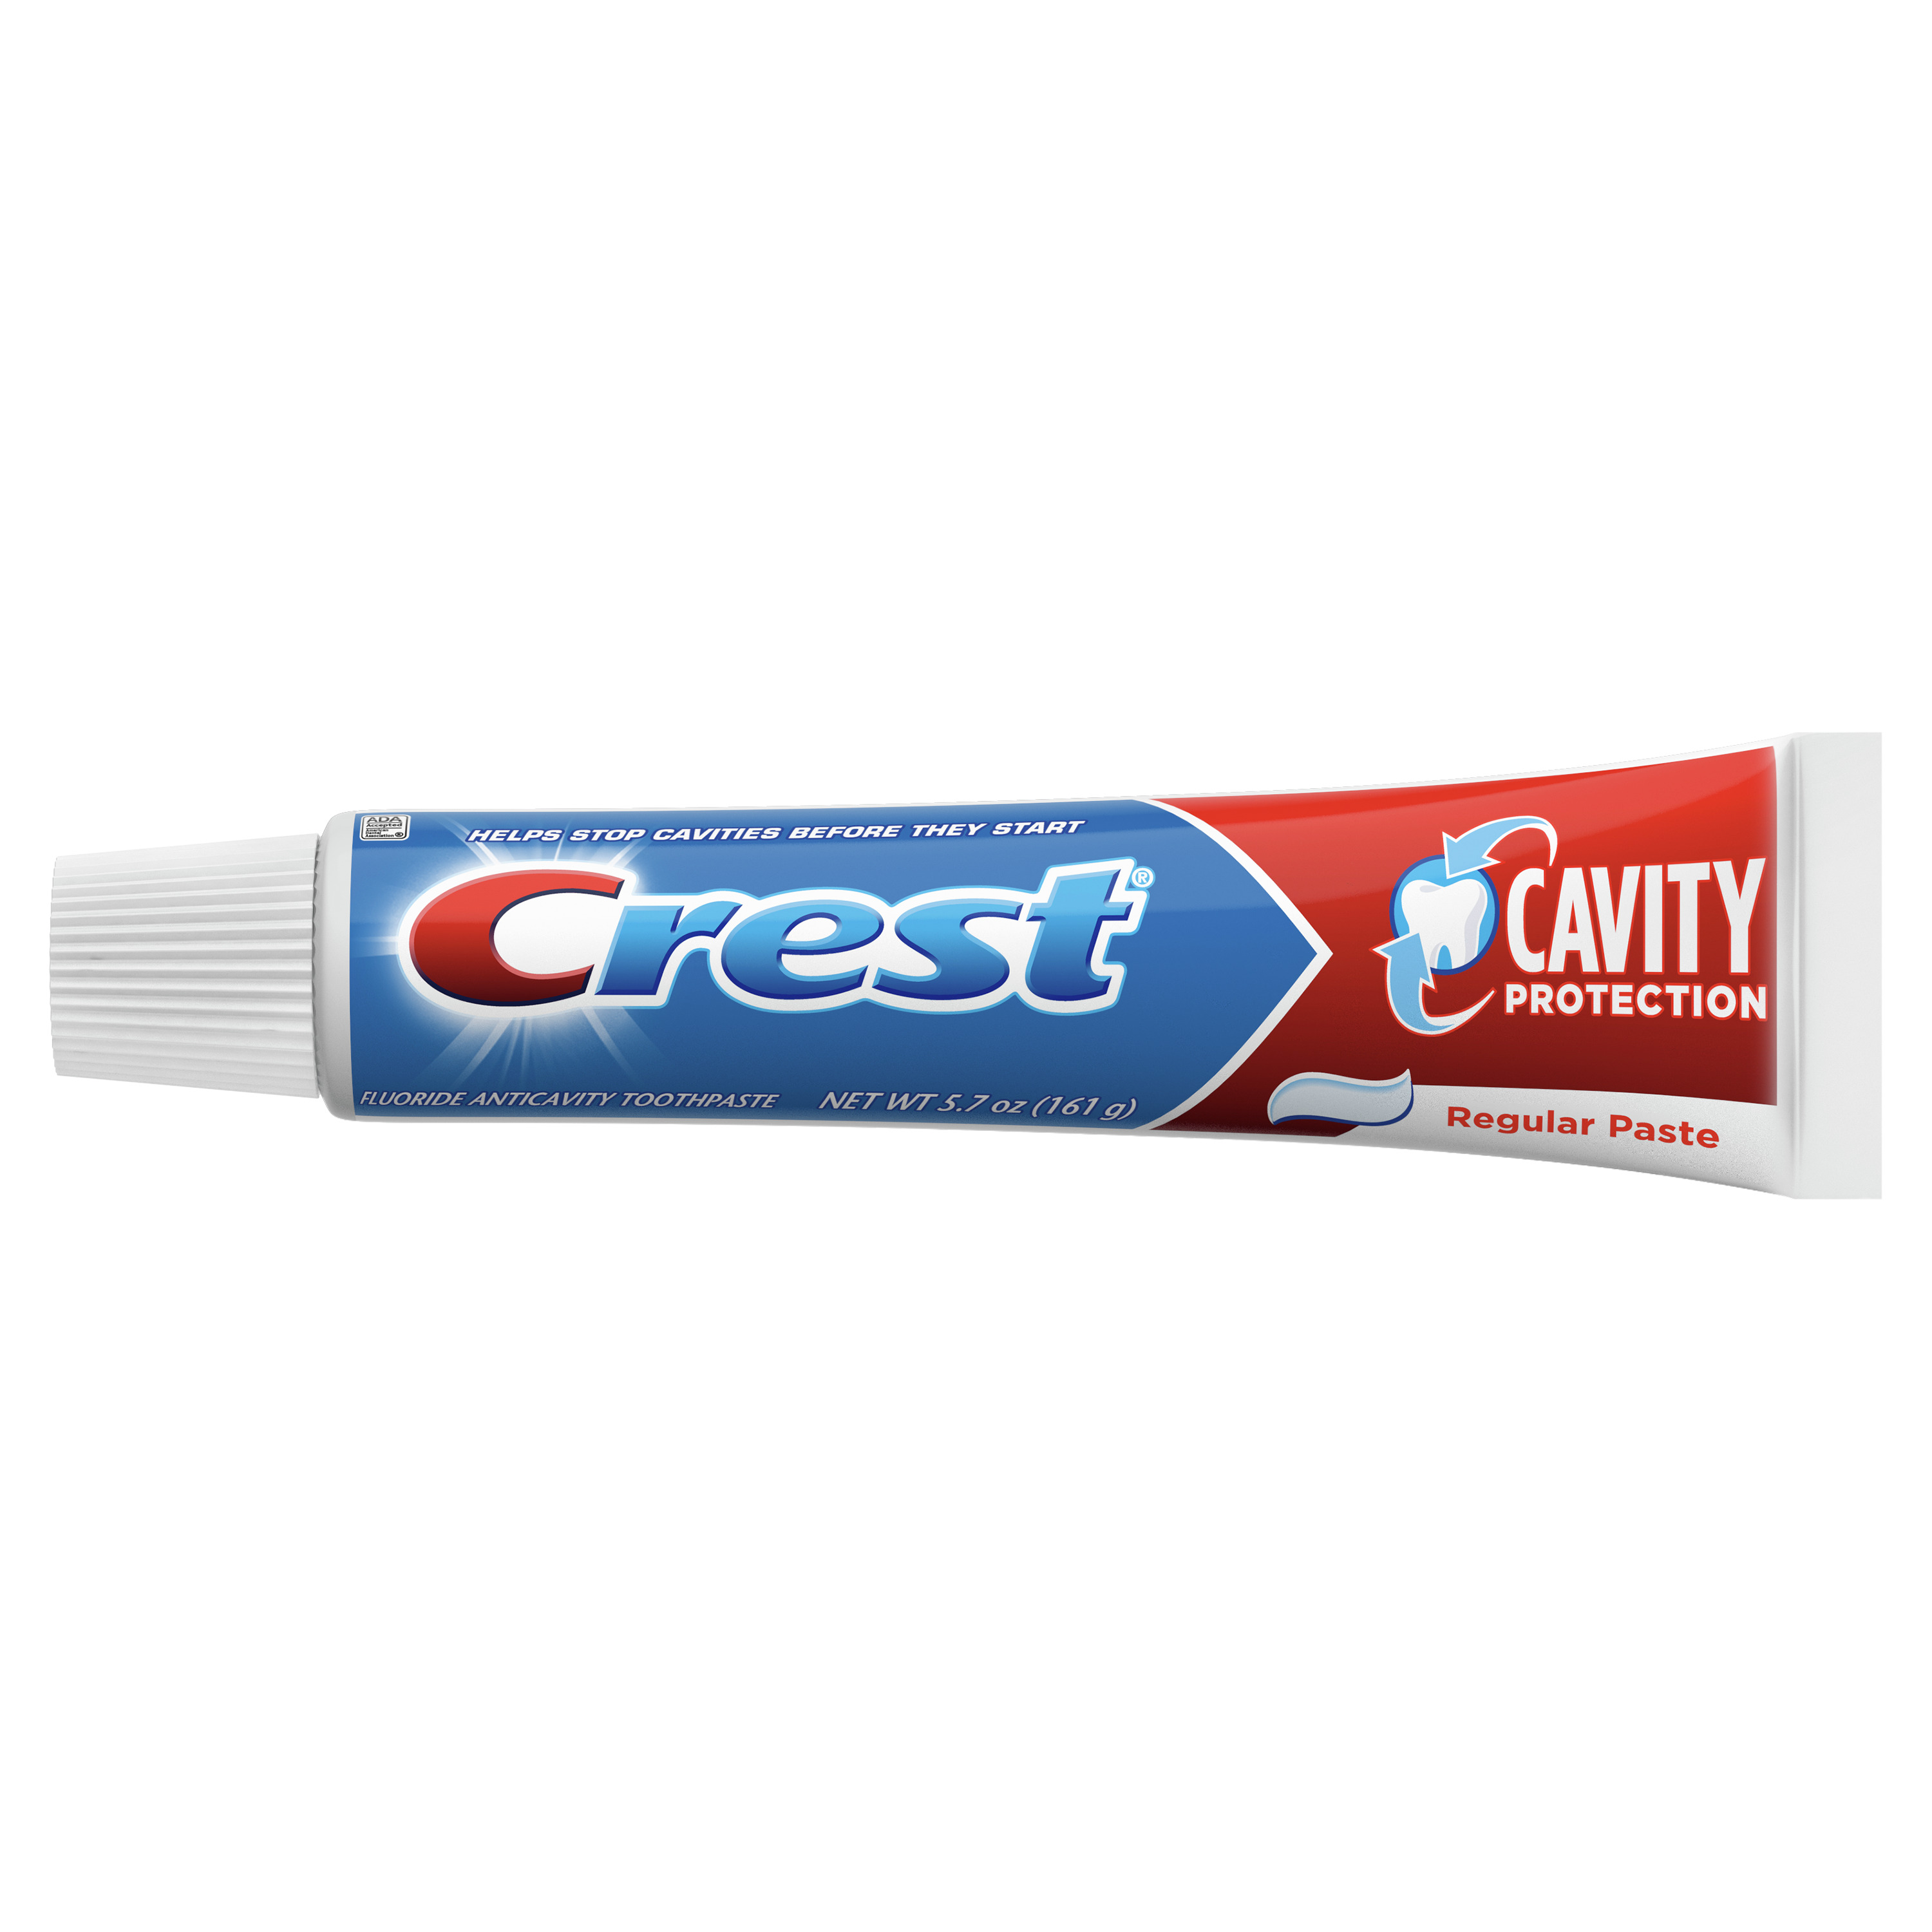 Crest Cavity Protection Toothpaste, Regular Paste, 5.7 oz, Pack of 4 - image 3 of 8